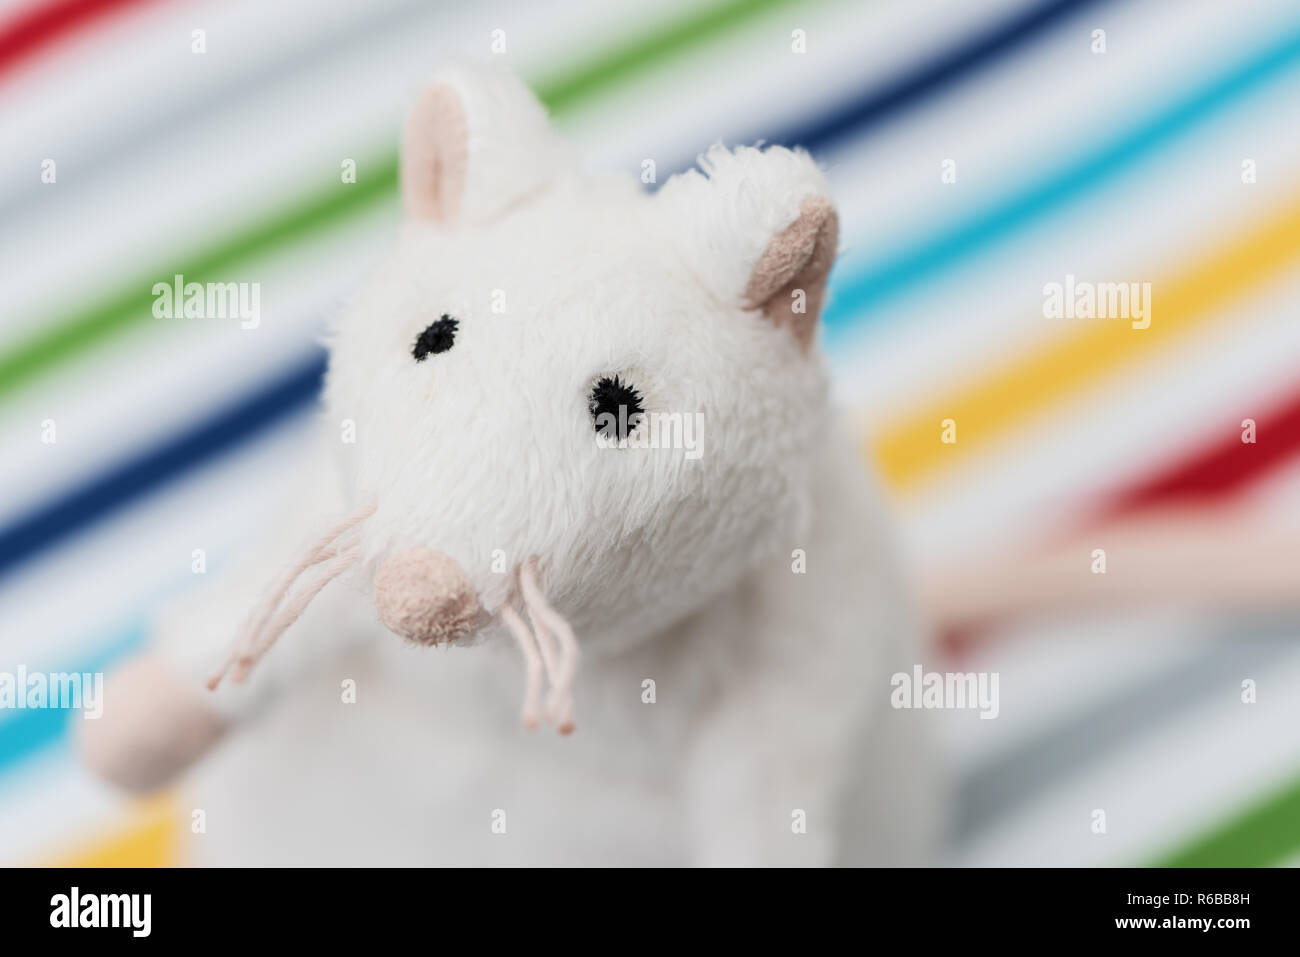 Toy white rat in the colorful strip background. Stock Photo